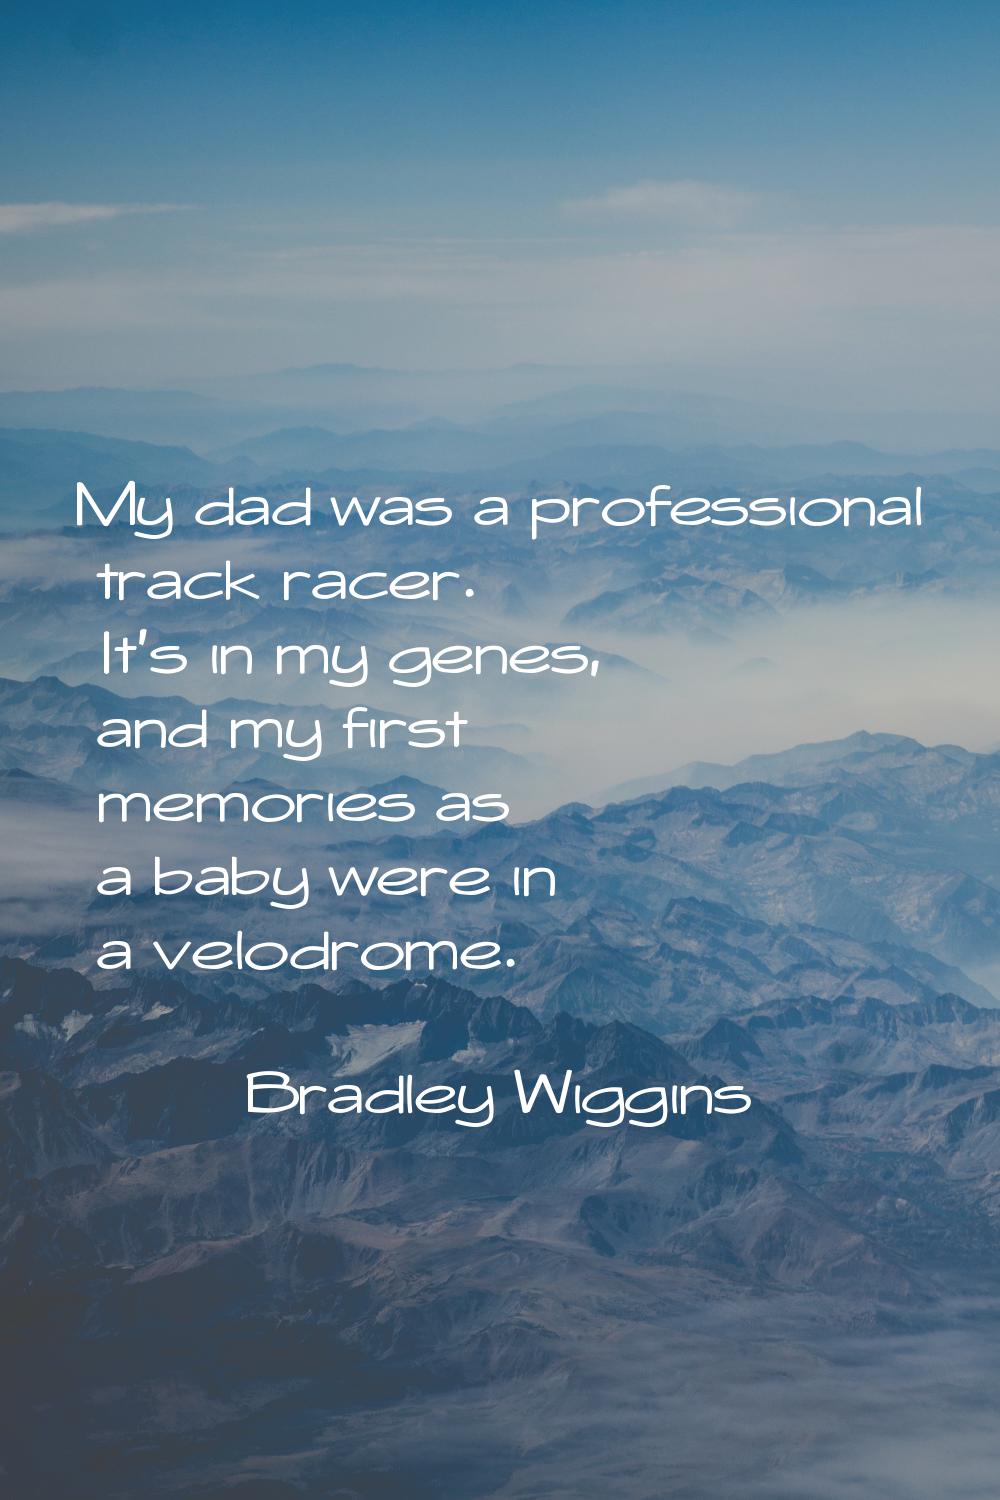 My dad was a professional track racer. It's in my genes, and my first memories as a baby were in a 